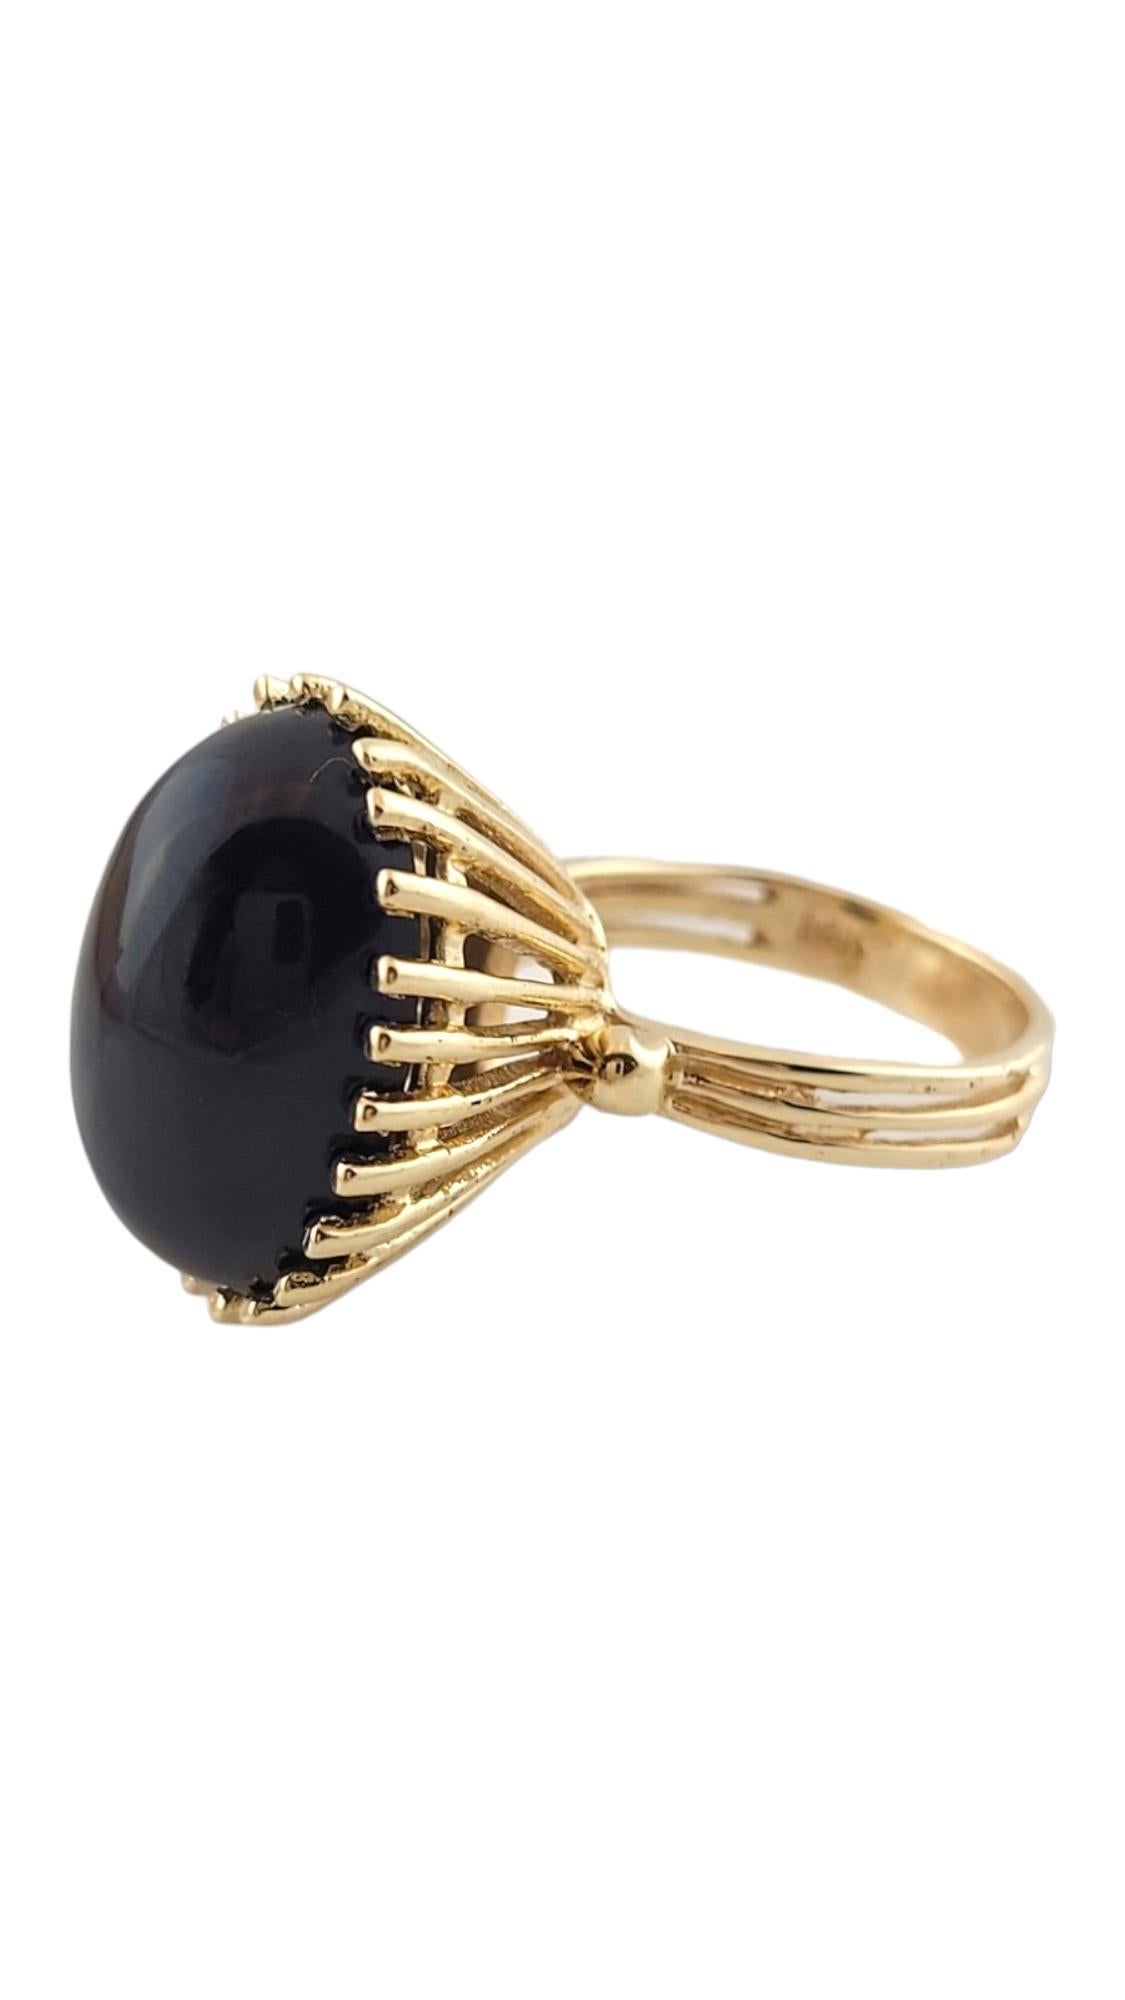 Vintage 14K Yellow Gold Onyx Ring Size 6.25

This gorgeous 14K gold ring features a beautiful oval black onyx stone!

Ring size: 6.25
Shank: 3.5mm
Front: 19.2mm X 14.8mm X 15.2mm

Weight: 8.2 g/ 5.2 dwt

Hallmark: 14K

Very good condition,